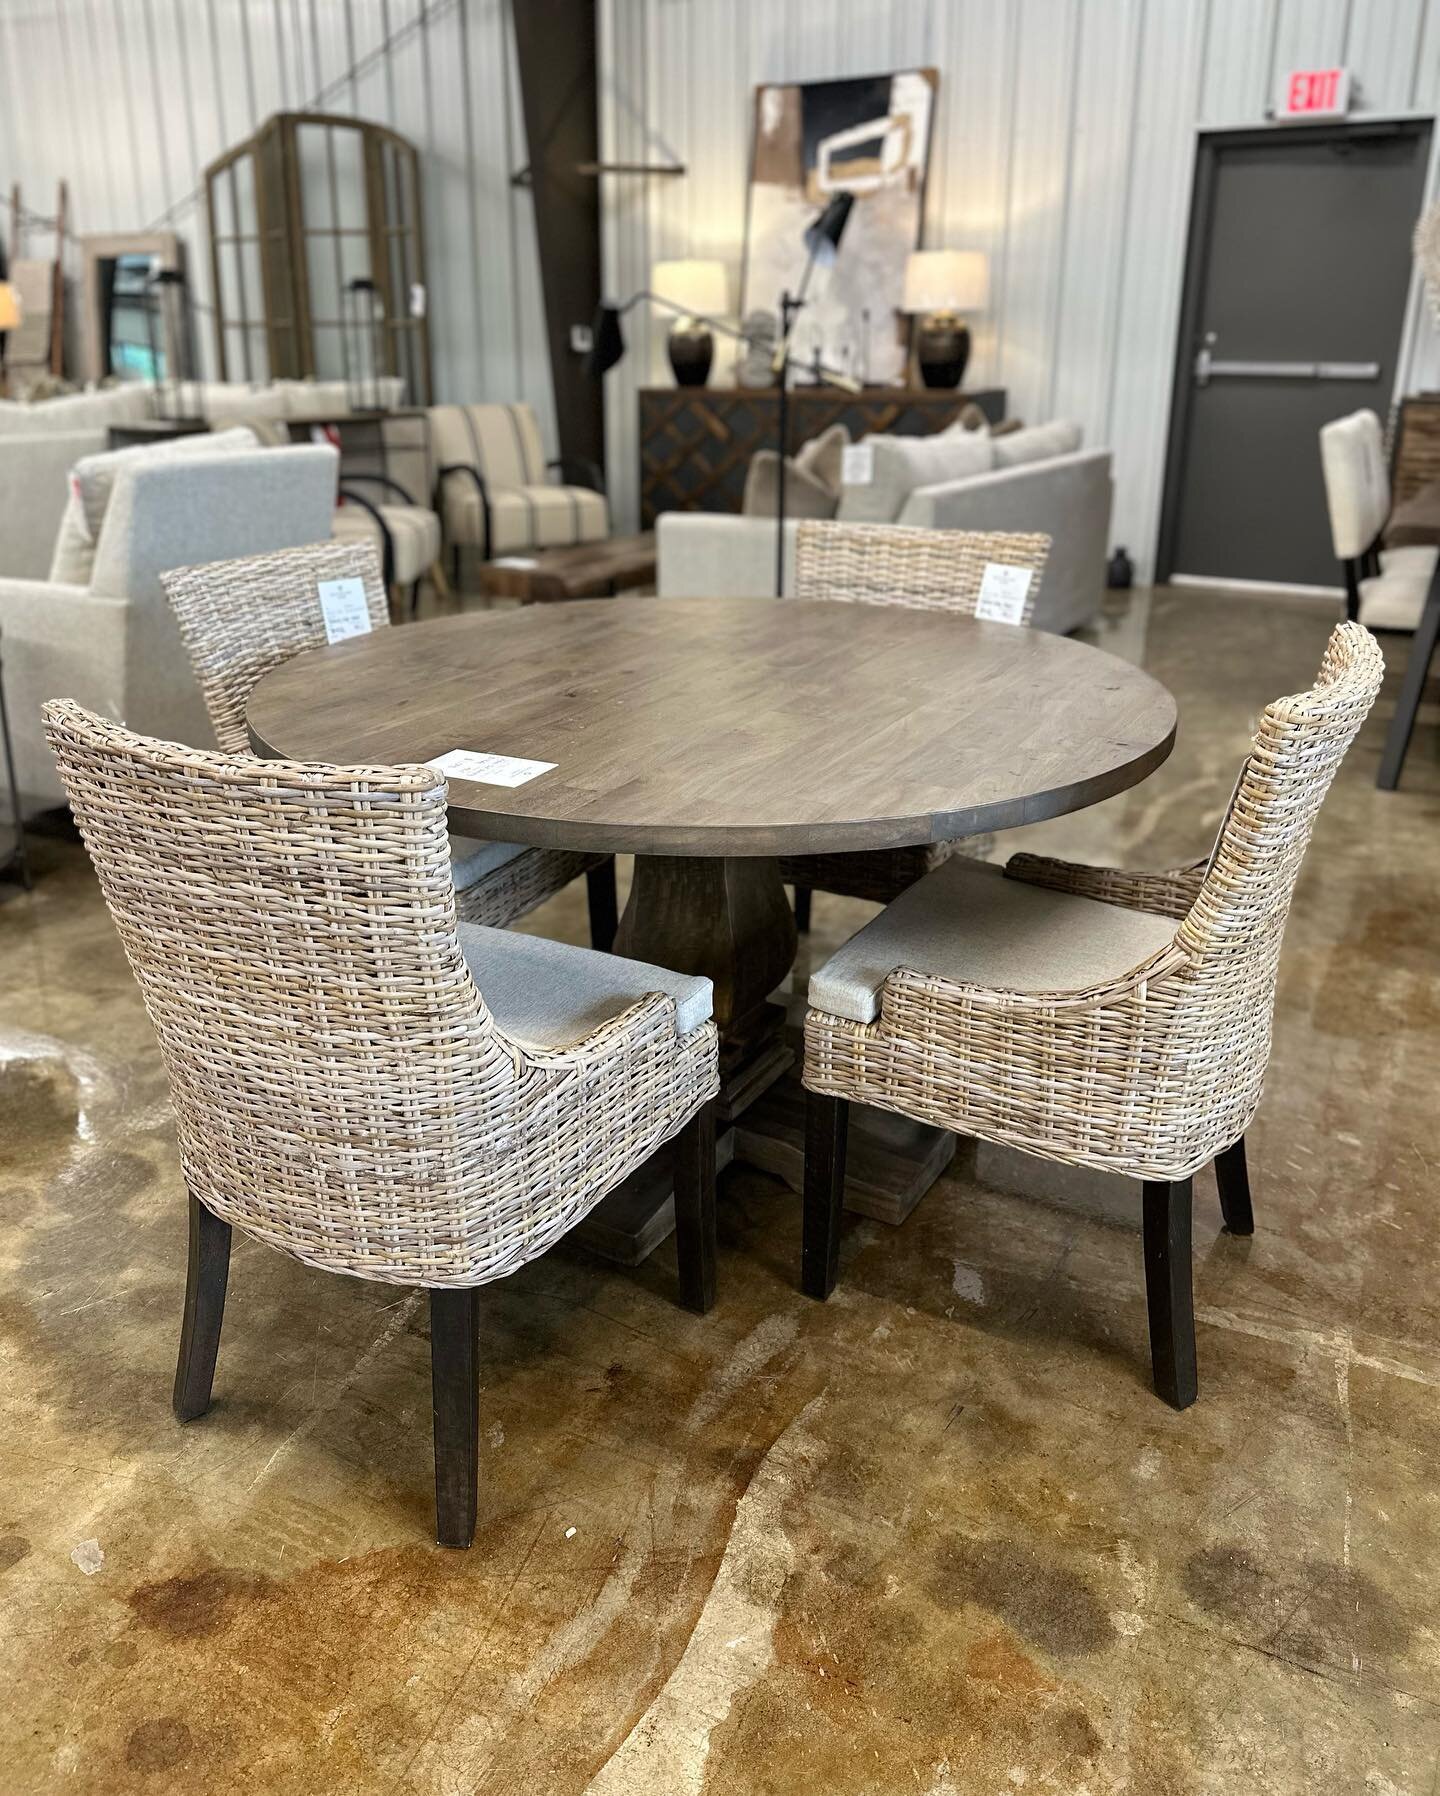 August Showroom Update! 💥

With a new month came lots of floor changes and tons of new inventory. We are excited to be showing an assortment of new dining room furniture, custom sofas &amp; chairs, sideboards, coffee tables, &amp; more! 

All produc